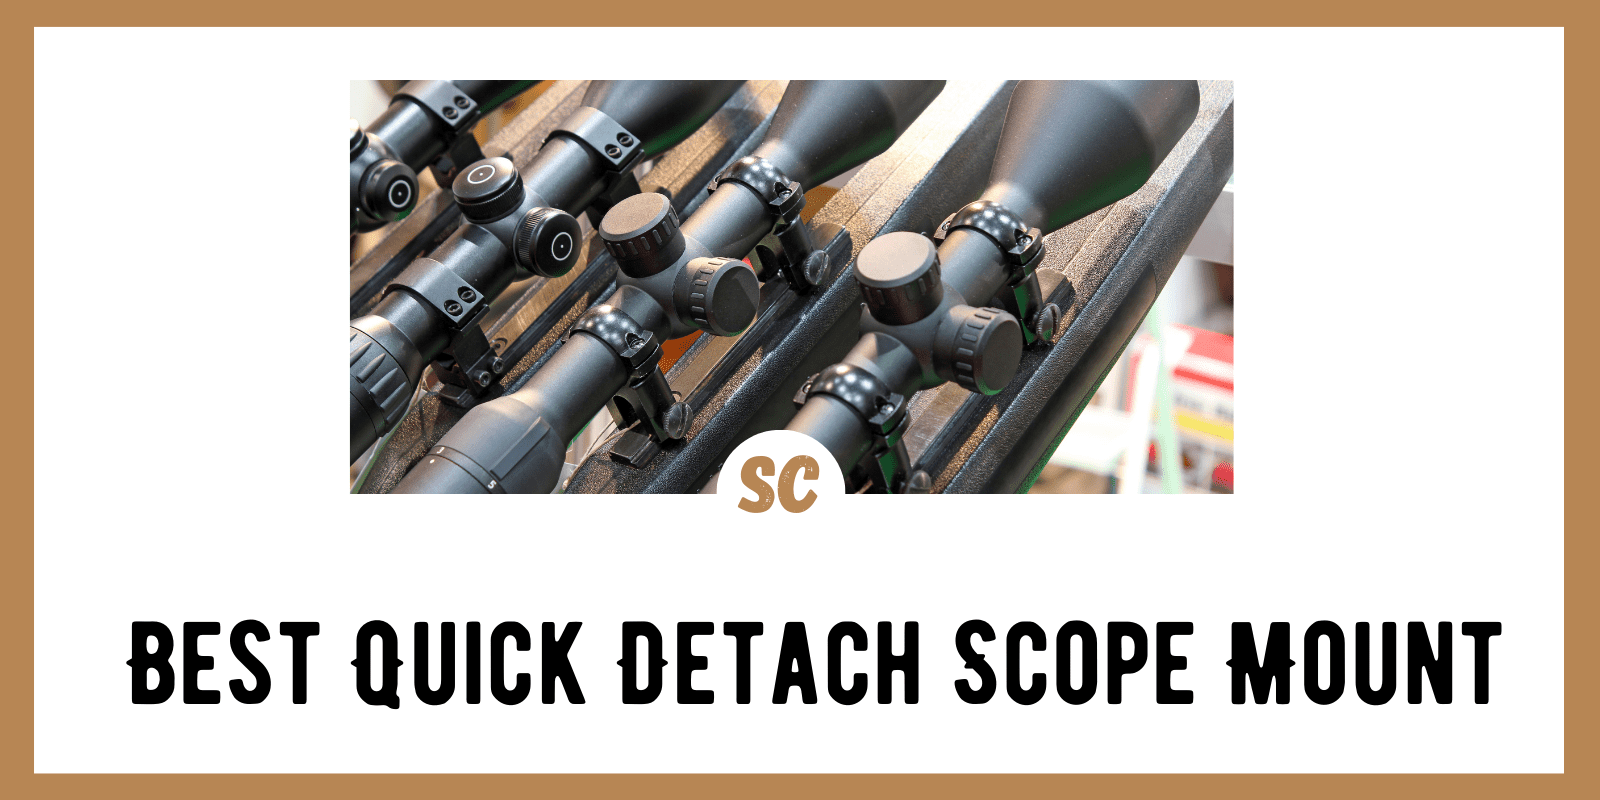 Ins and Outs of Quick Detach Scope Mounts